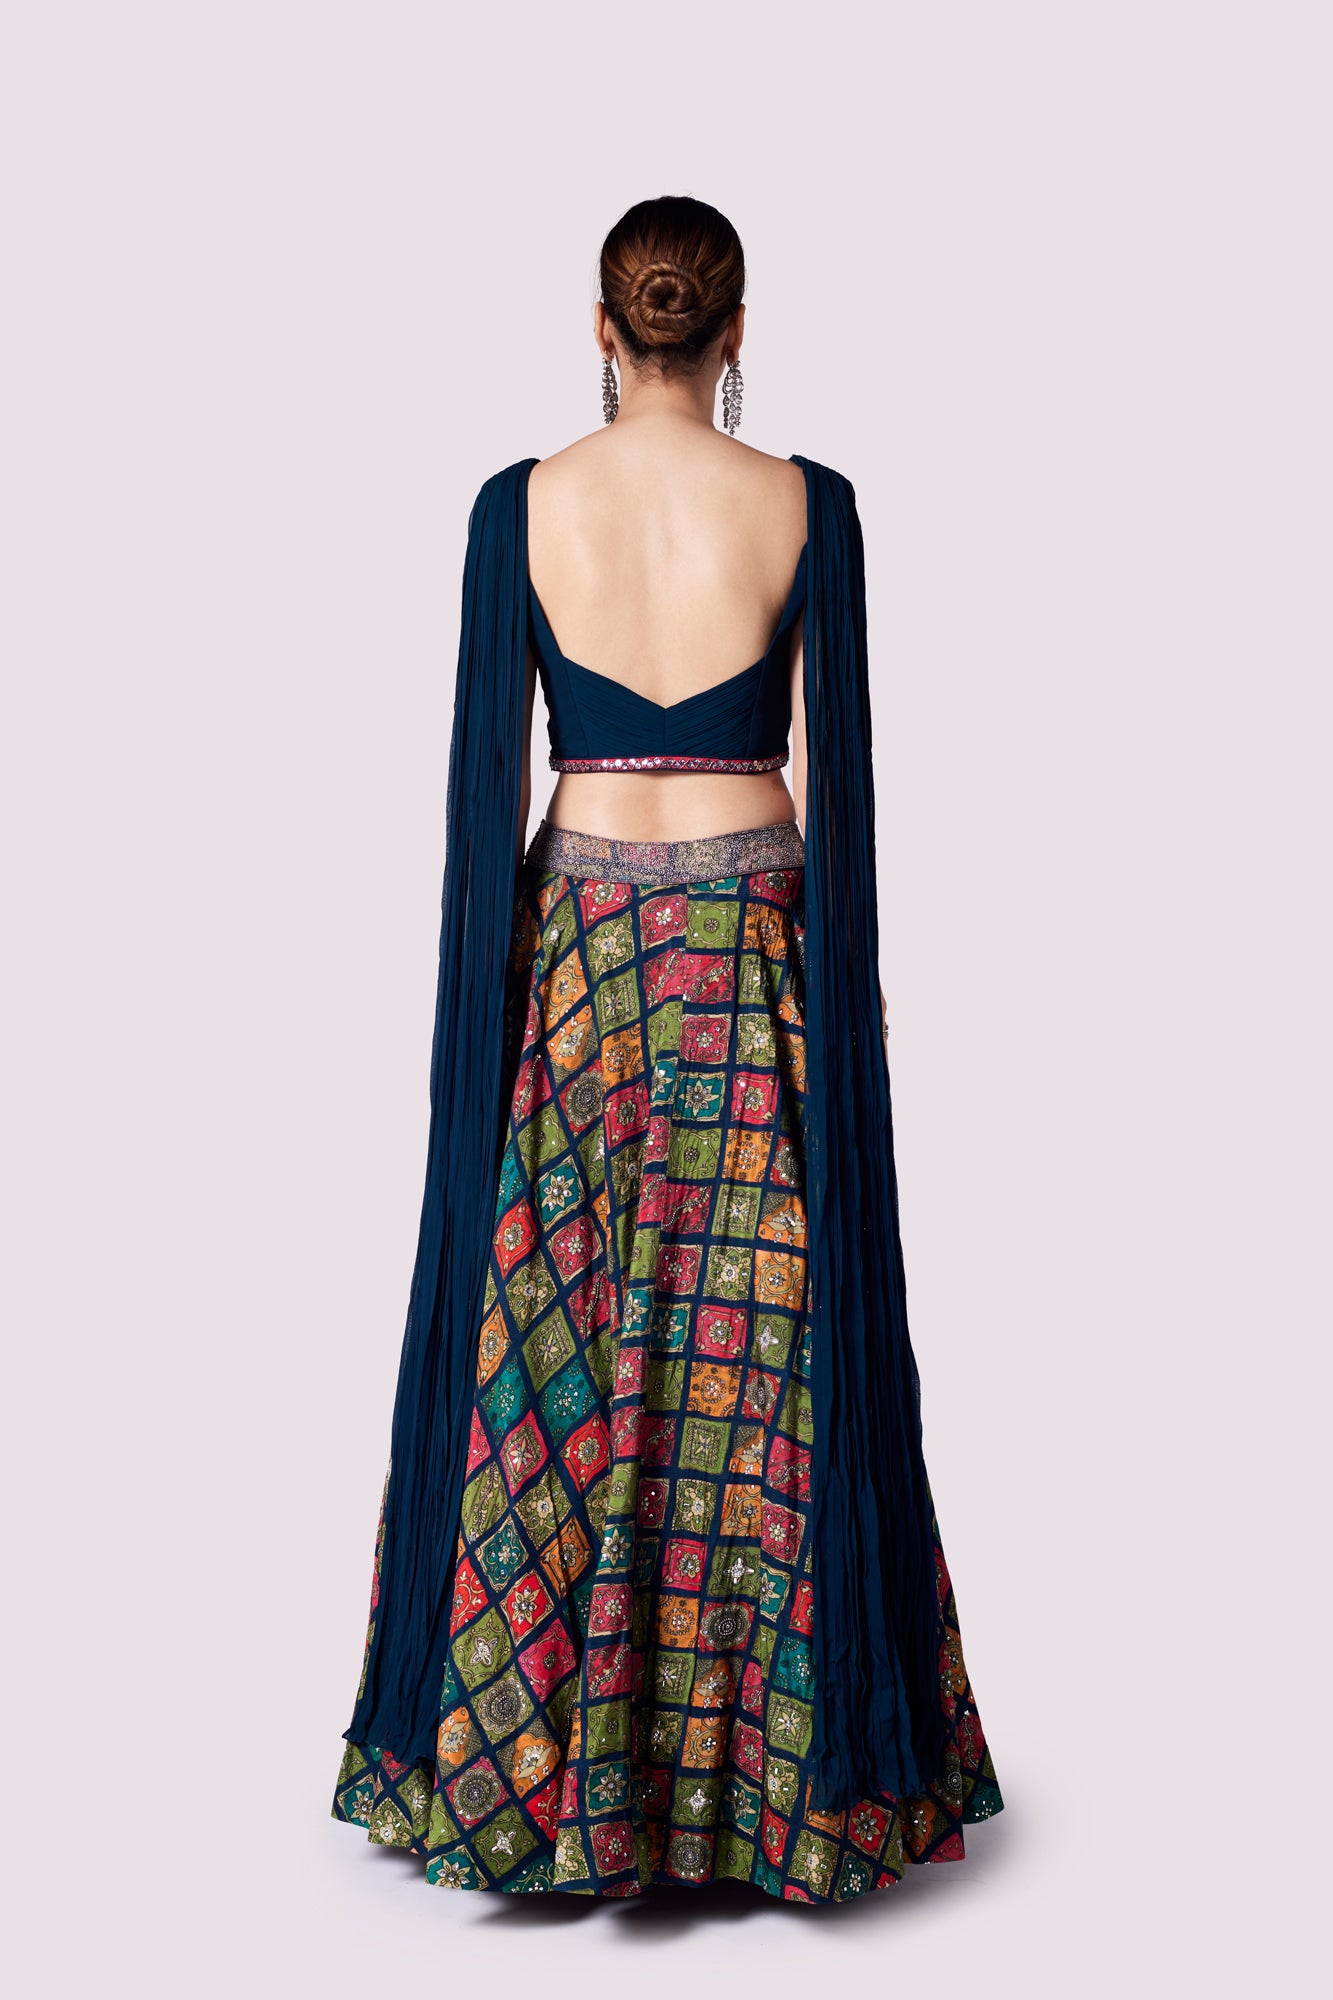 Buy blue silk skirt online in USA with georgette pleated top. Shop the best and latest designs in embroidered sarees, designer sarees, Anarkali suit, lehengas, sharara suits for weddings and special occasions from Pure Elegance Indian fashion store in USA.-back